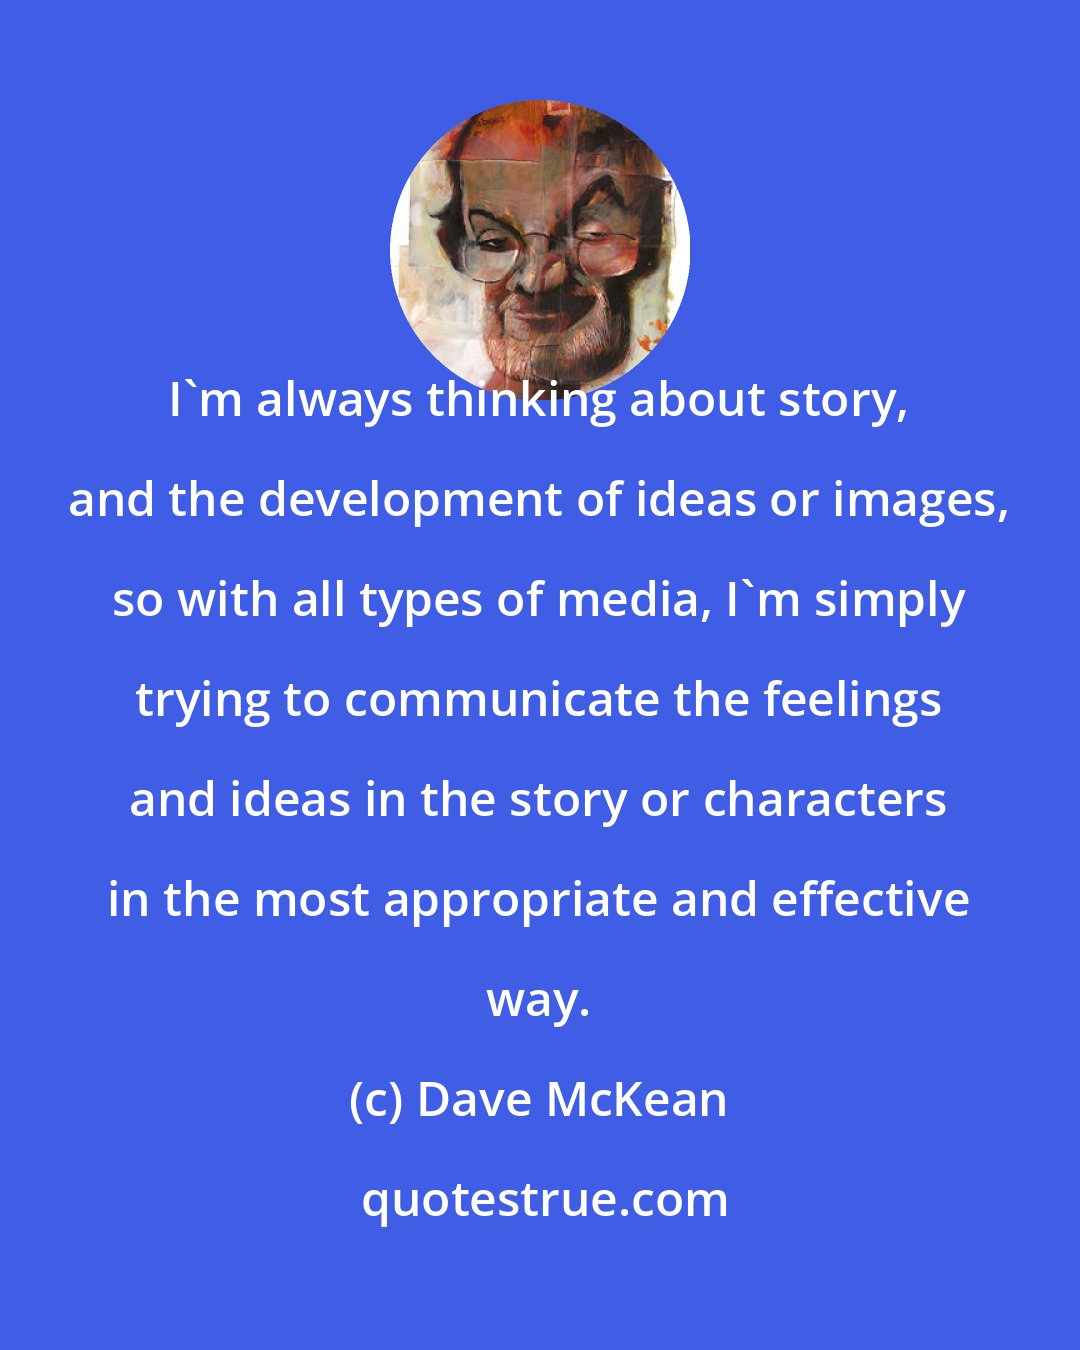 Dave McKean: I'm always thinking about story, and the development of ideas or images, so with all types of media, I'm simply trying to communicate the feelings and ideas in the story or characters in the most appropriate and effective way.